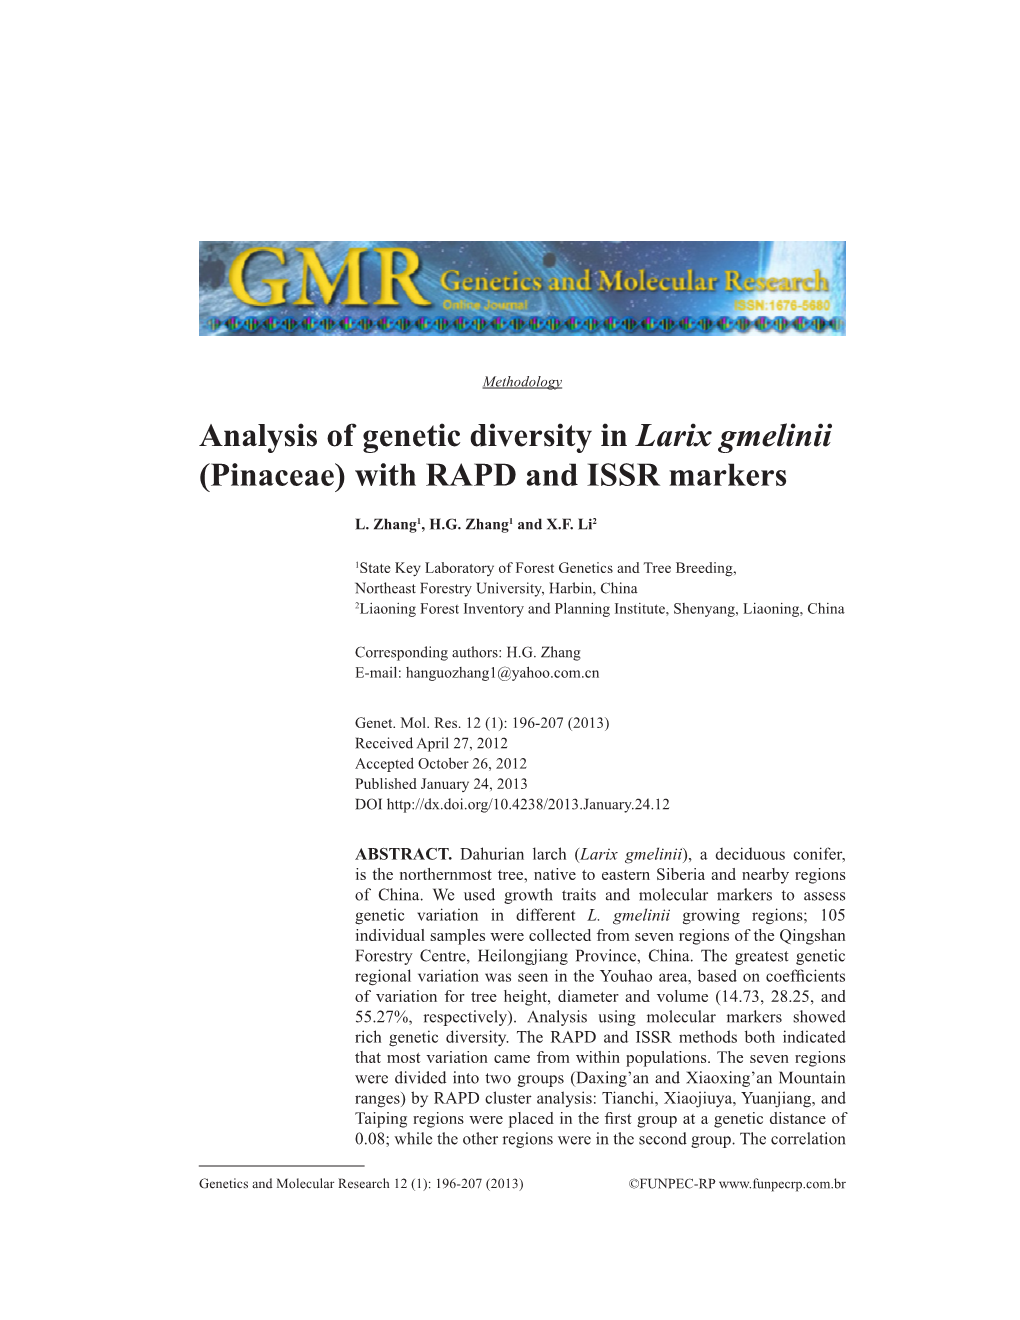 Analysis of Genetic Diversity in Larix Gmelinii (Pinaceae) with RAPD and ISSR Markers